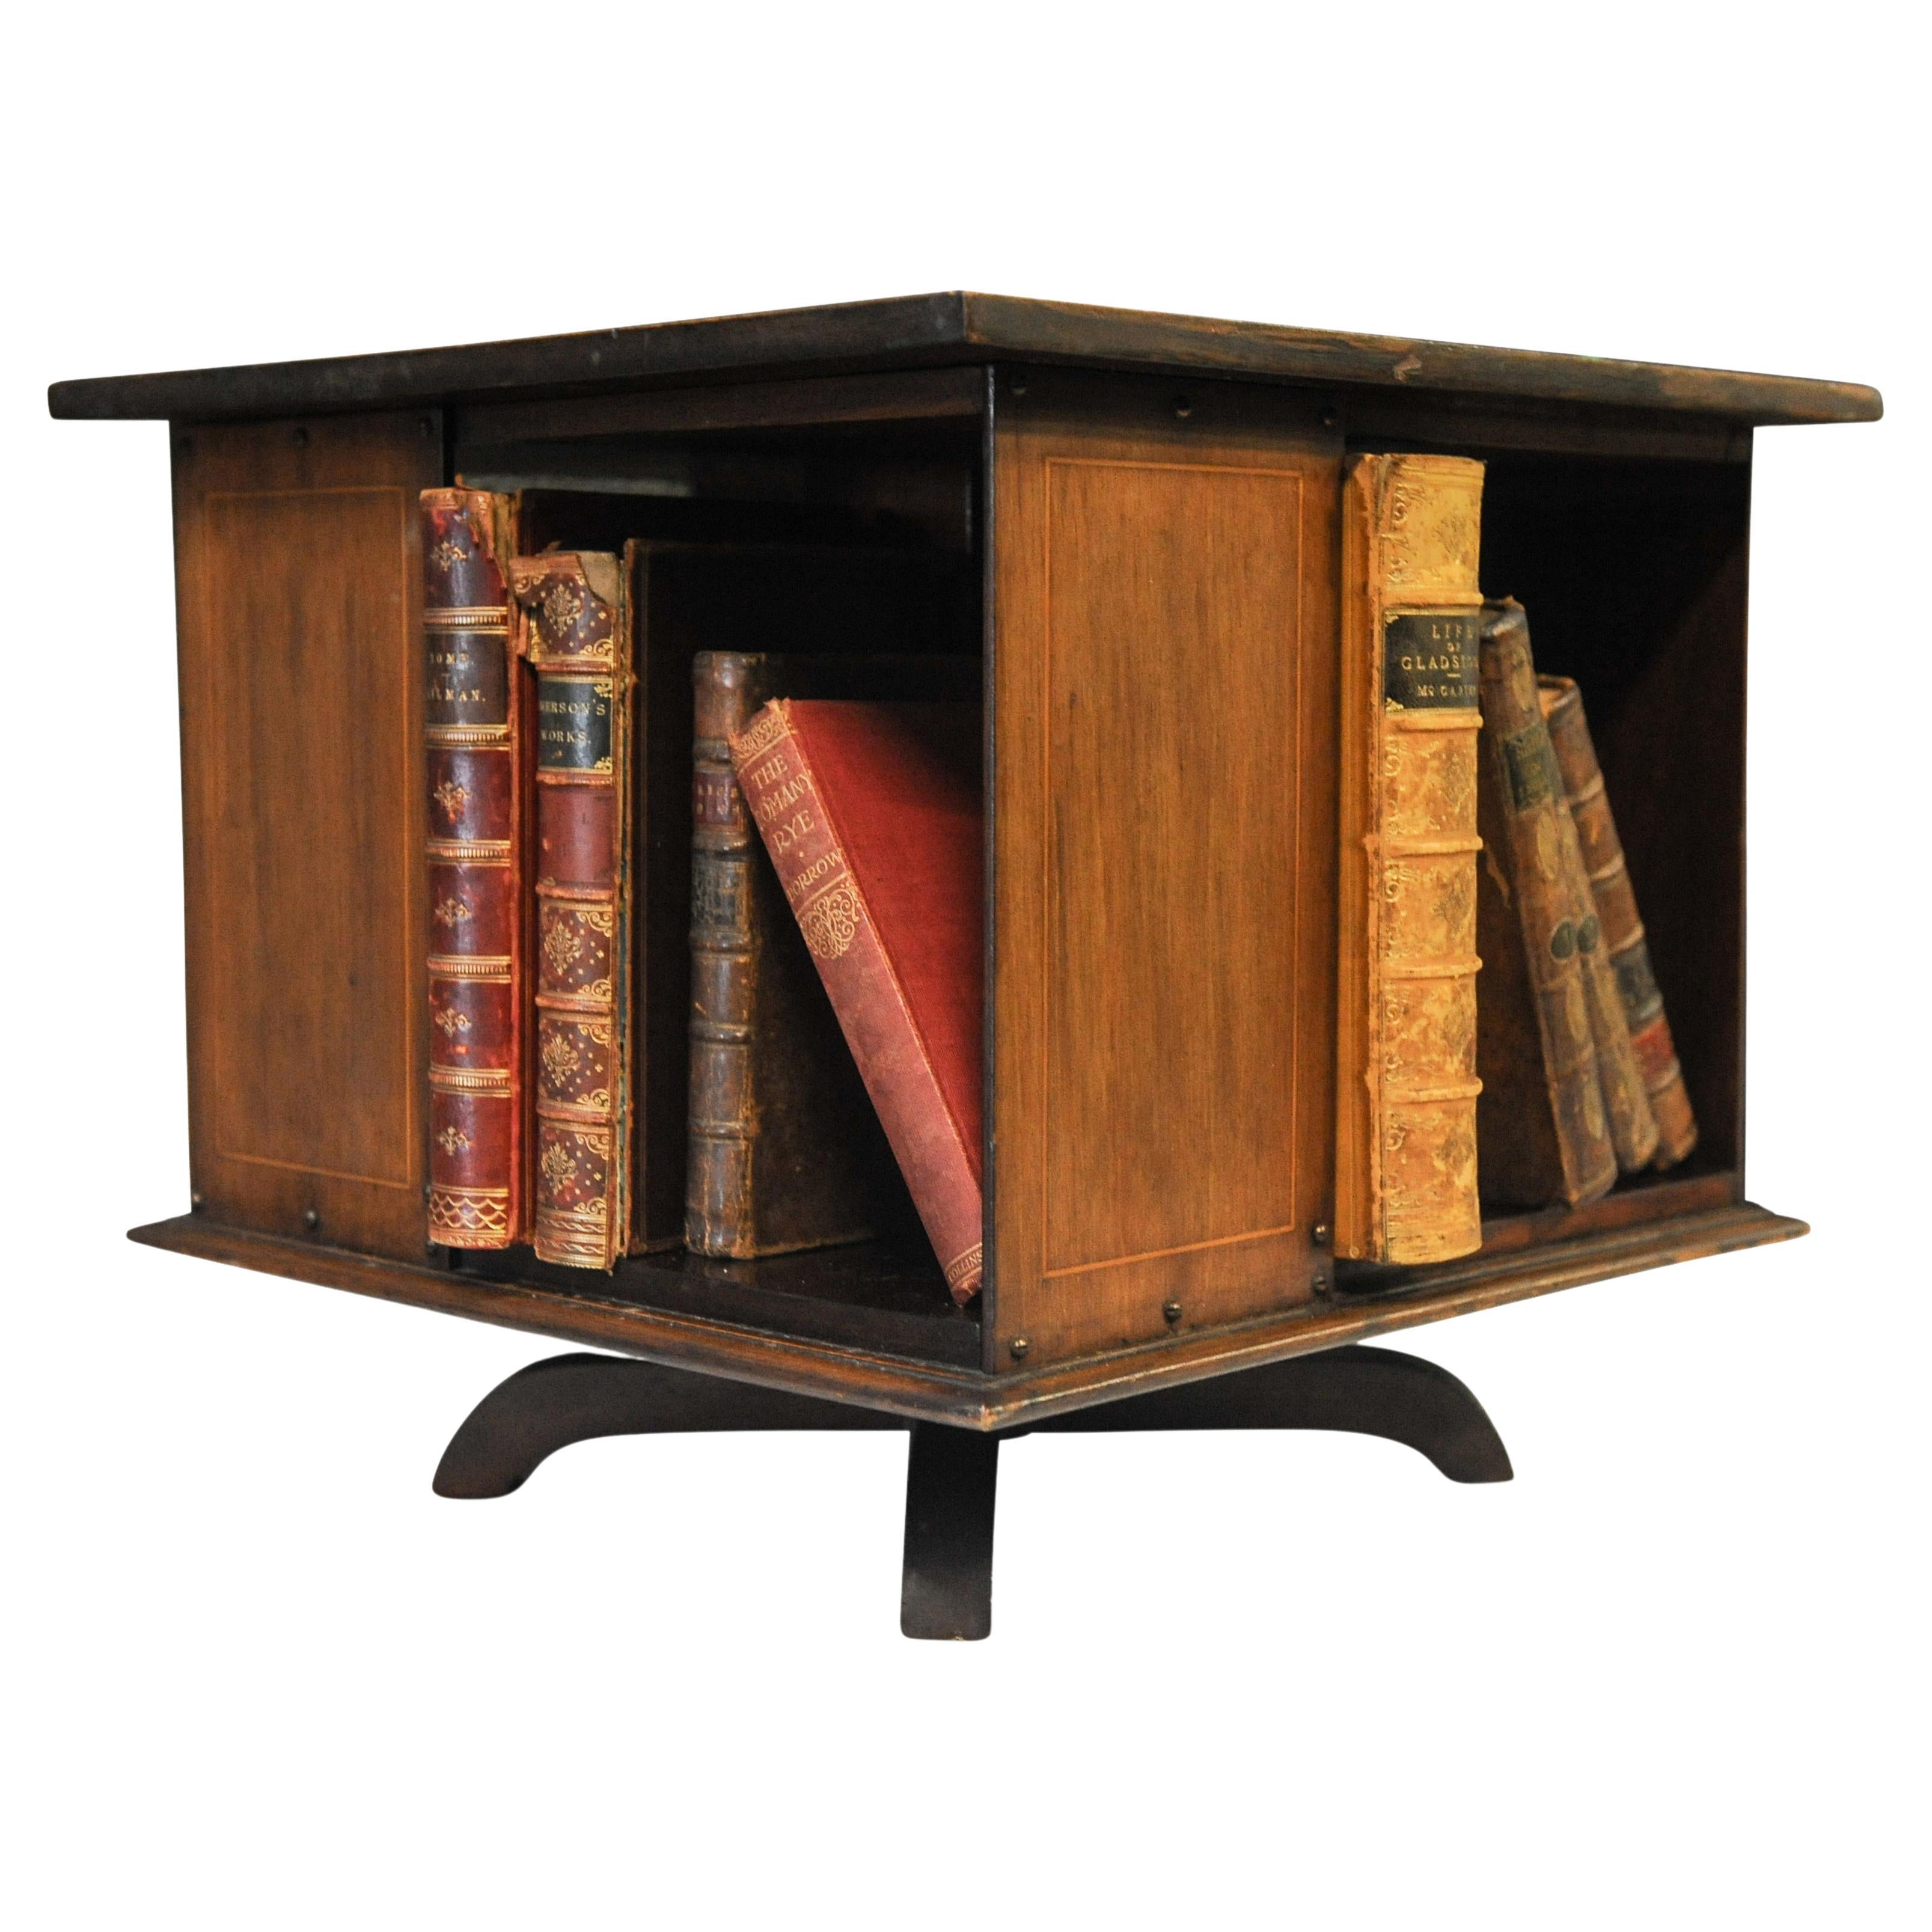 Early 20th Century Revolving Tabletop Bookcase Handmade With In-Lay Detailing For Sale